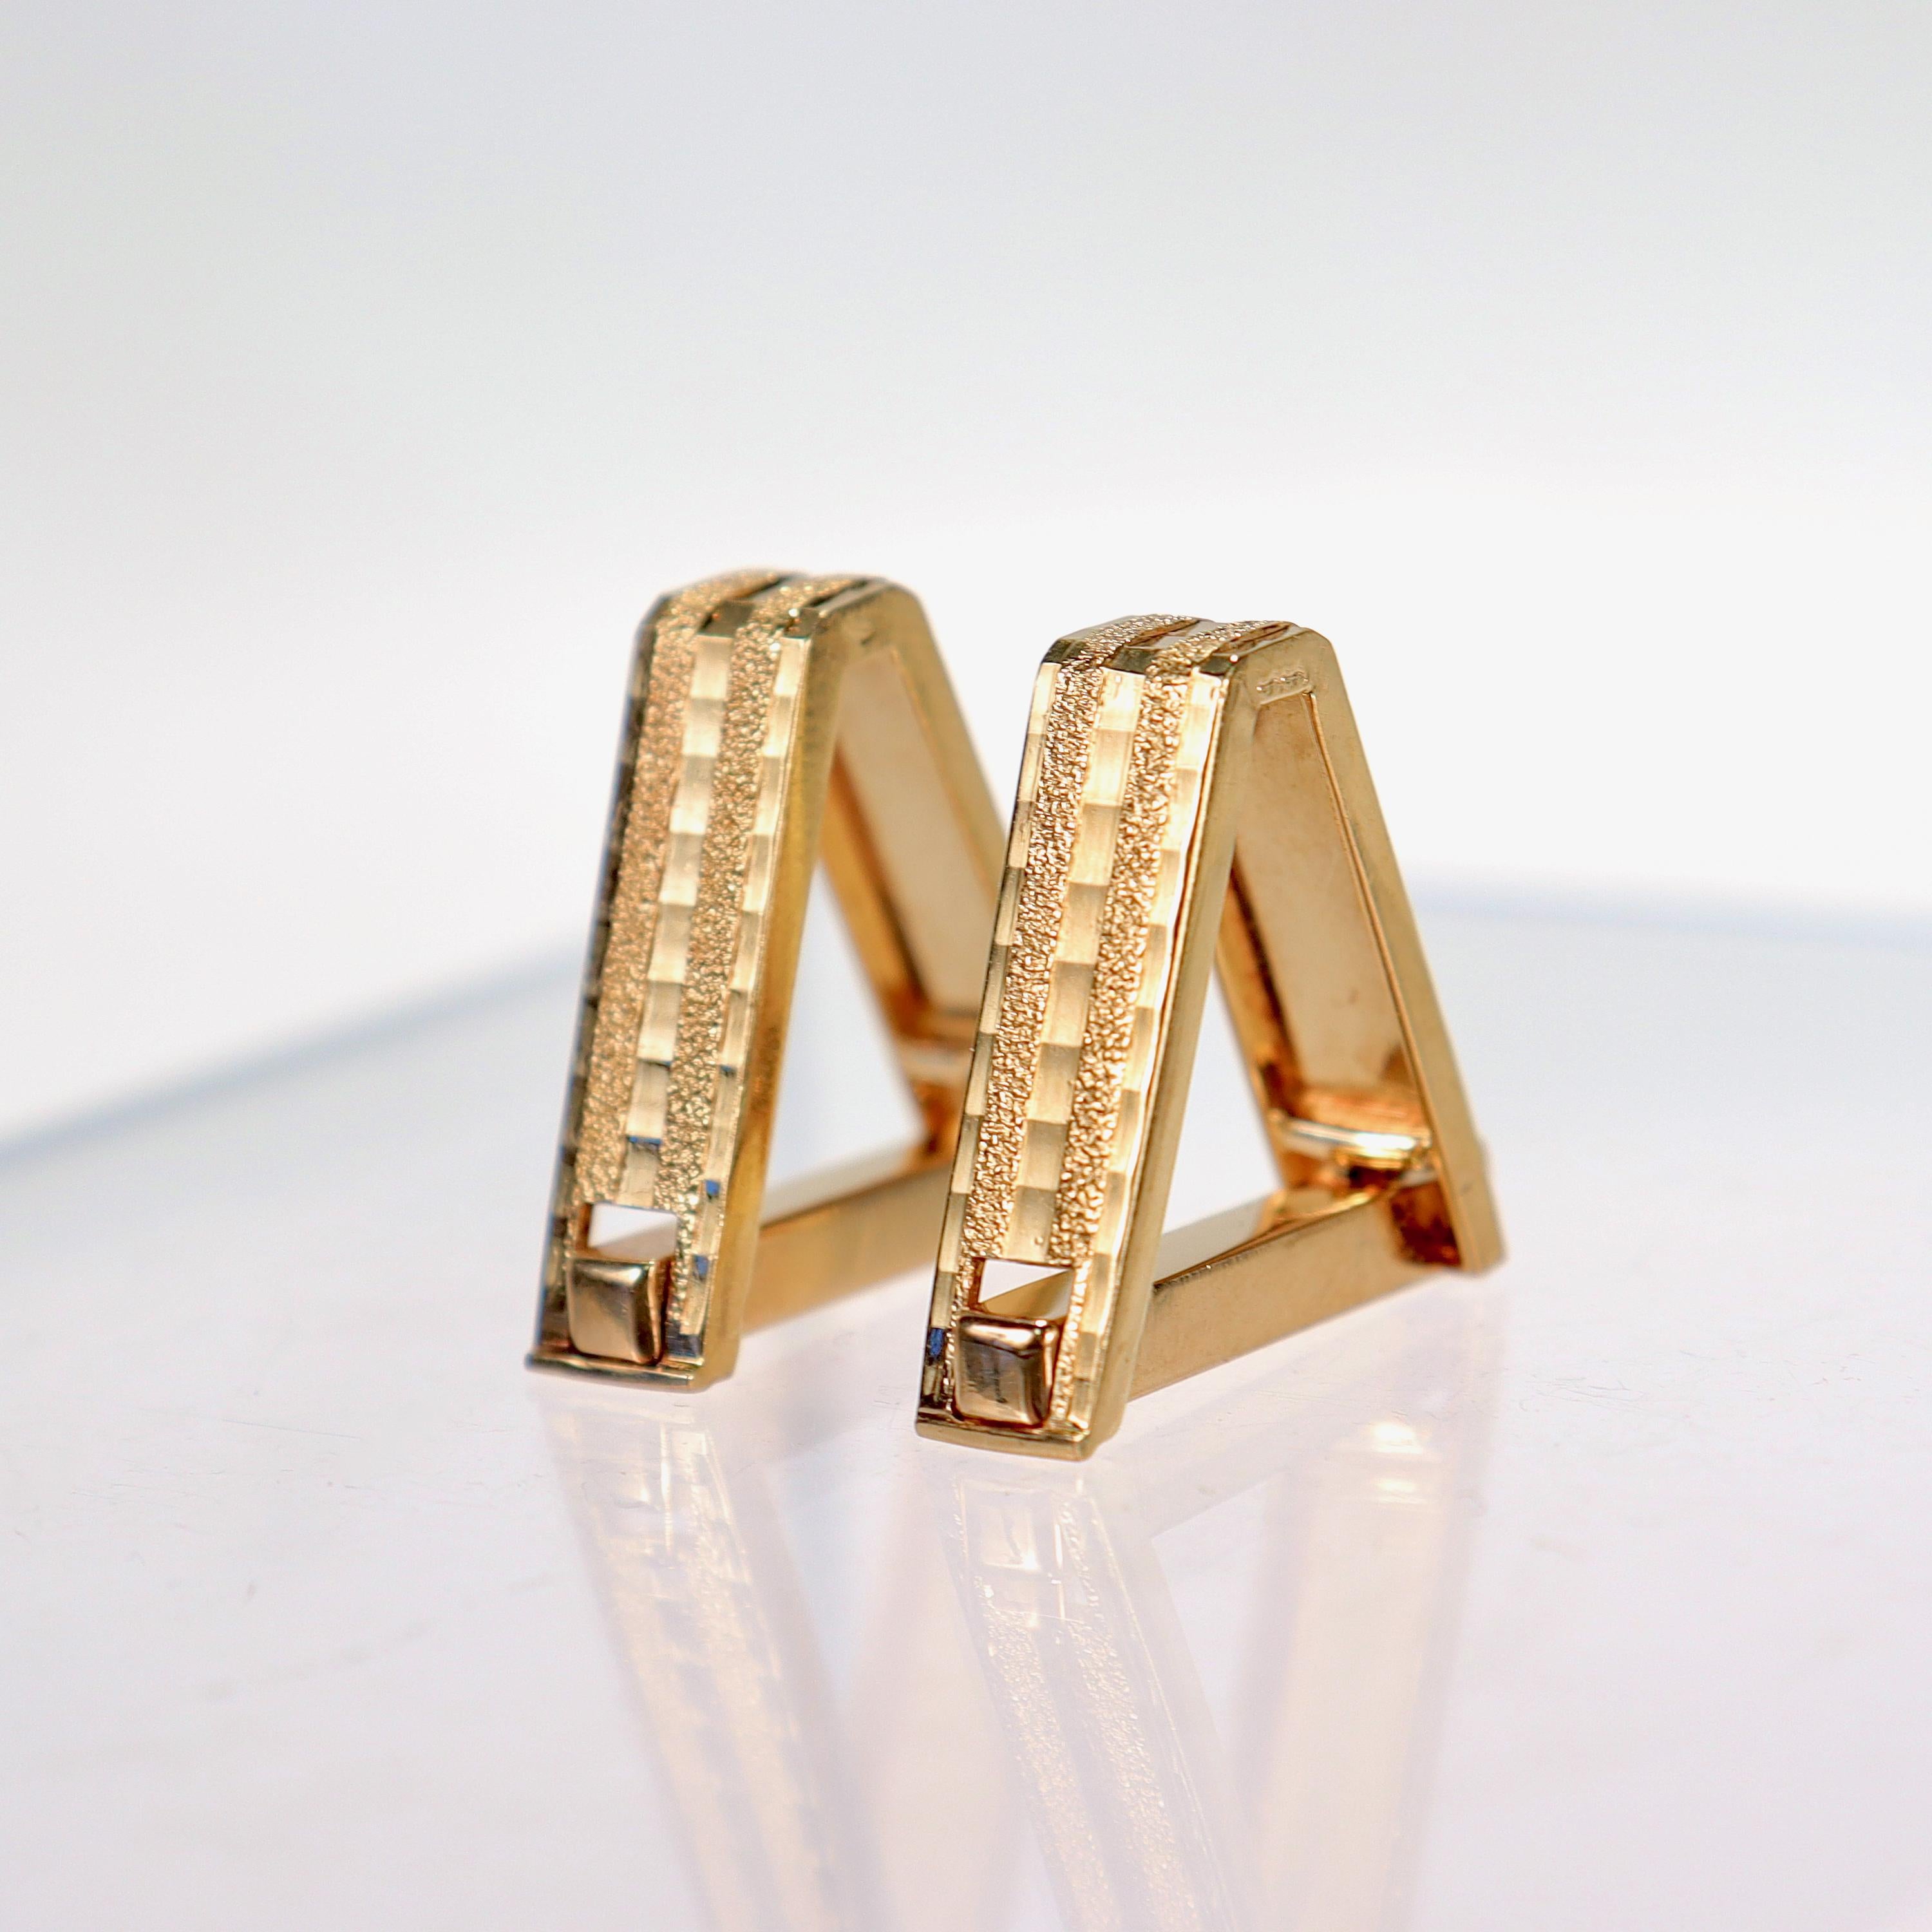 Men's Signed 18 Karat French Gold Triangular or Wrapped Cufflinks For Sale